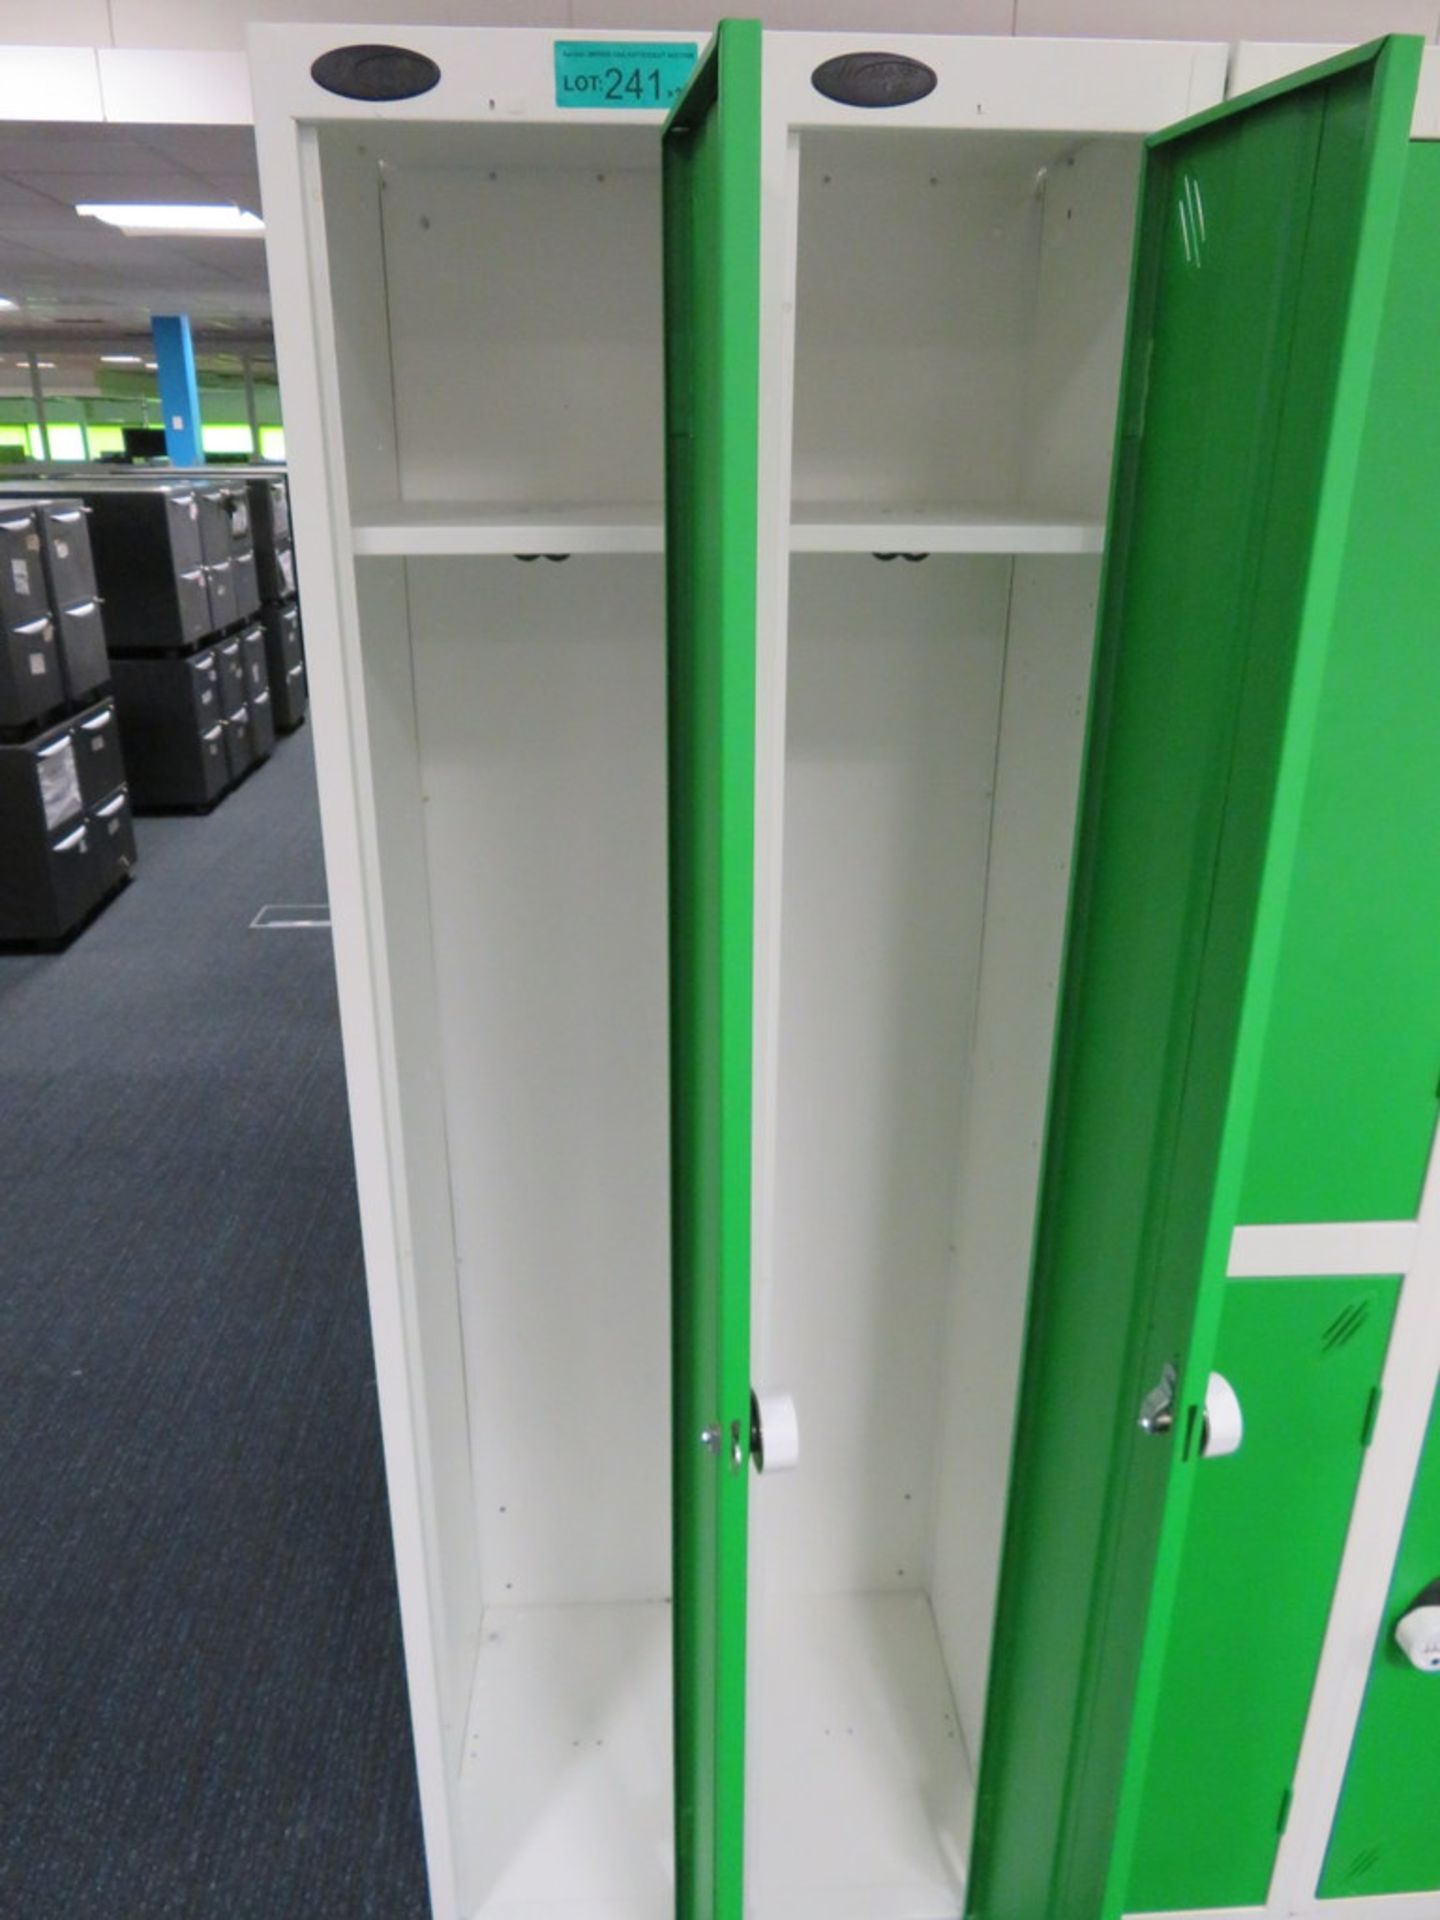 2x Probe Full Length Personnel Lockers. Dimensions: 300x450x1780mm (LxDxH) - Image 2 of 2